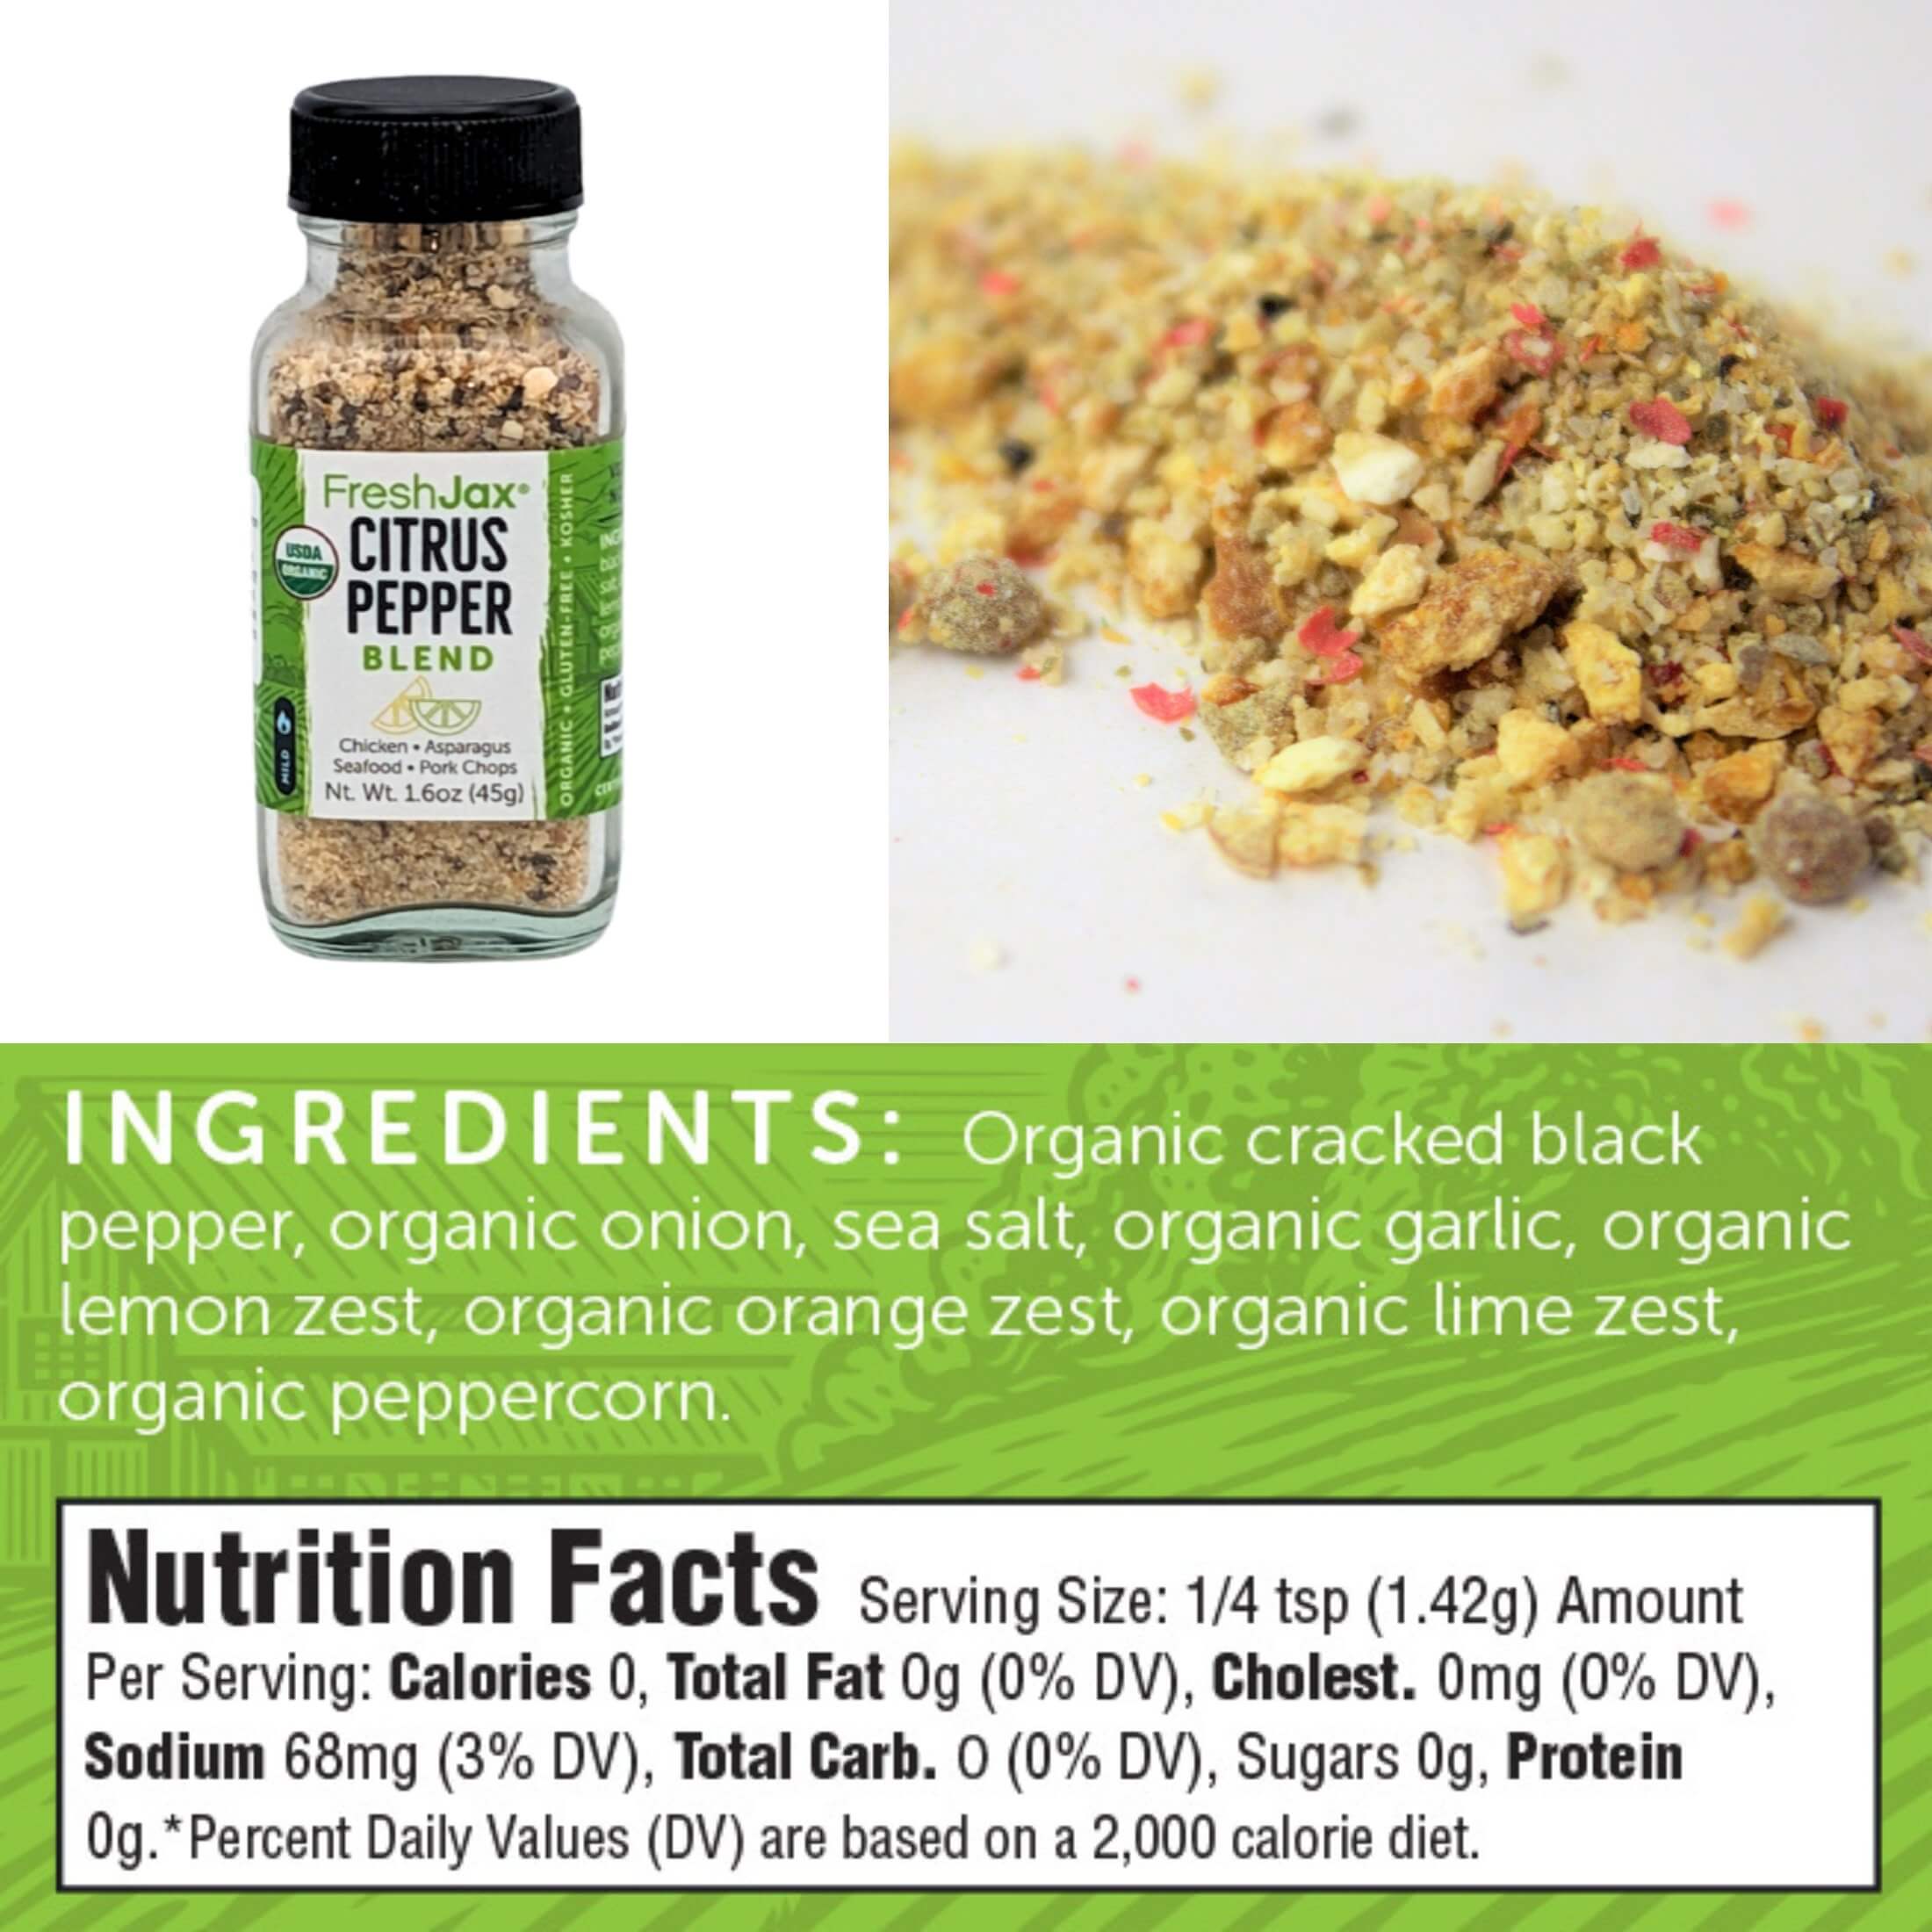 FreshJax Organic Spices Citrus Pepper Blend Ingredients and Nutritional Information